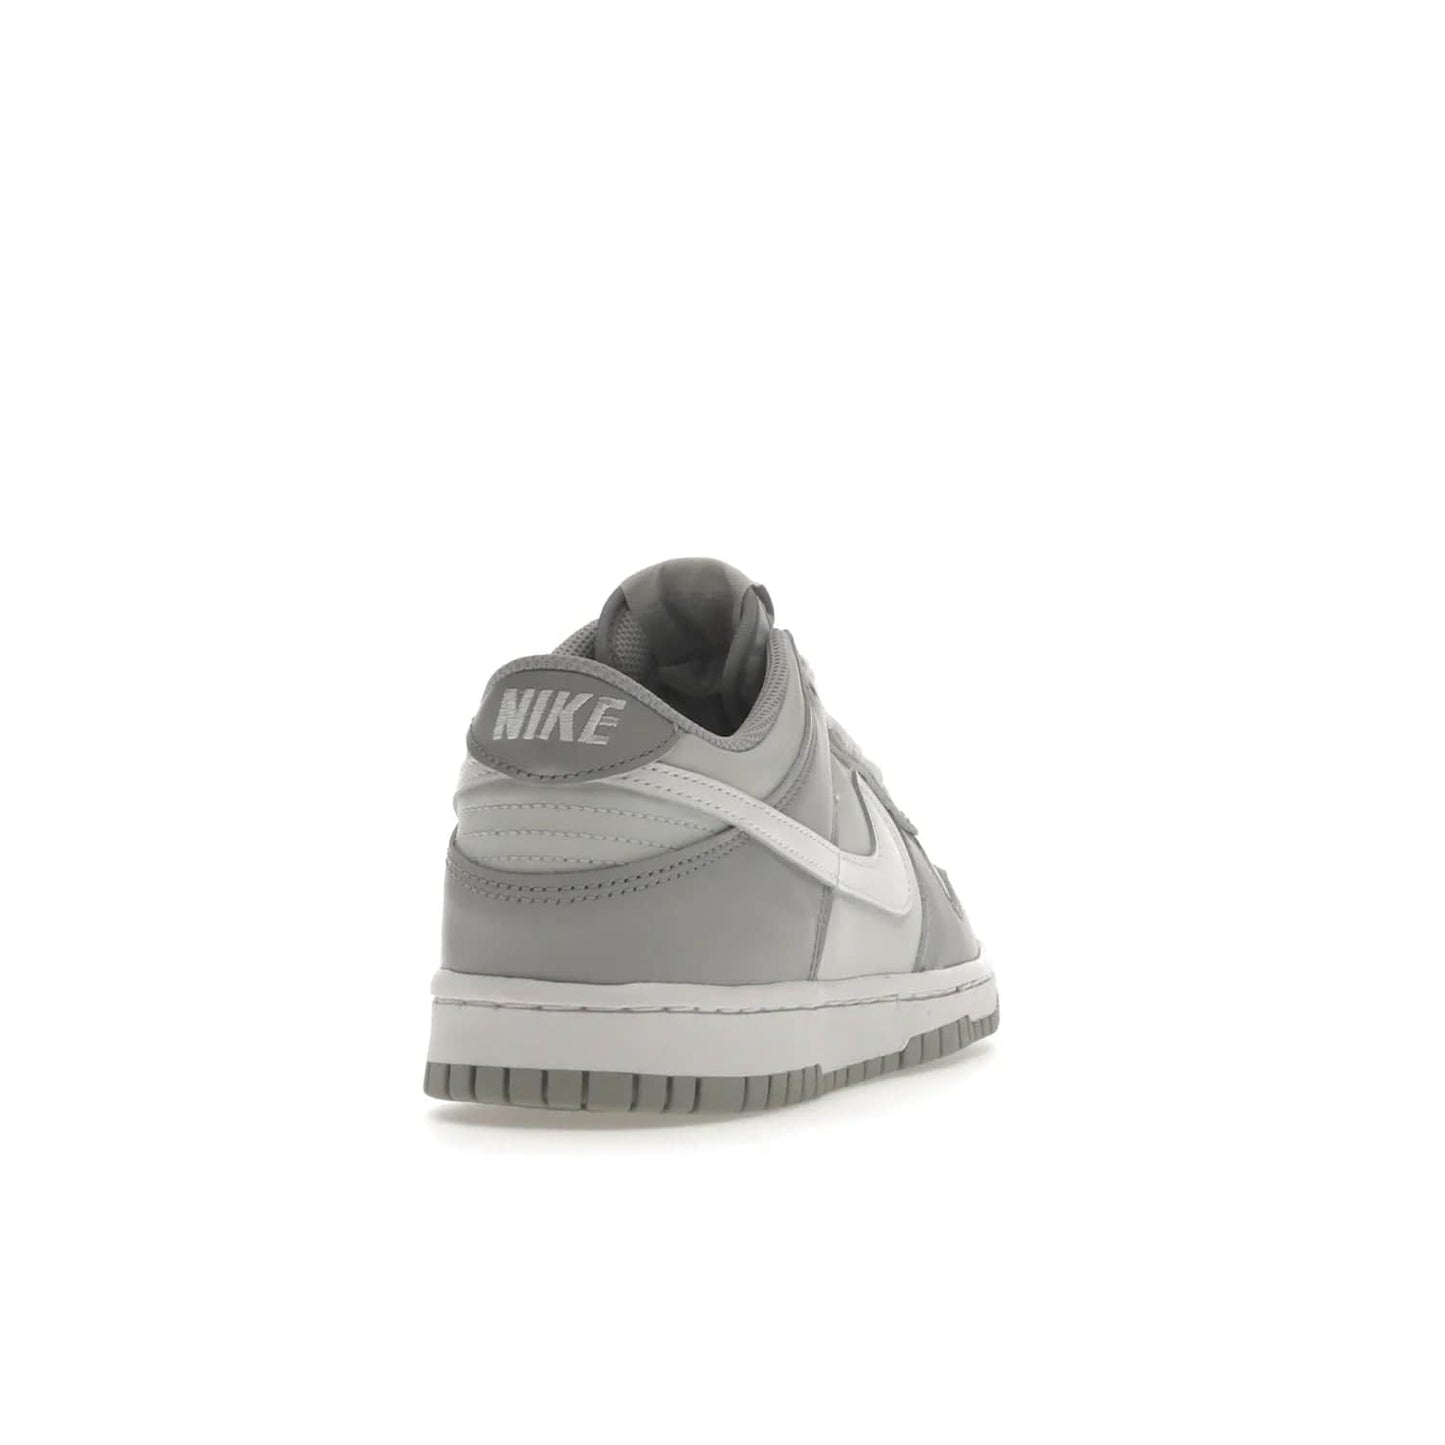 Nike Dunk Low Two-Toned Grey (GS) - Image 30 - Only at www.BallersClubKickz.com - Stylish Nike Dunk Low GS Two-Toned Grey featuring leather build, light/dark grey shades, white Swoosh logo & gray rubber outsole. Get ready to make a statement with this timeless classic released in March 2022.